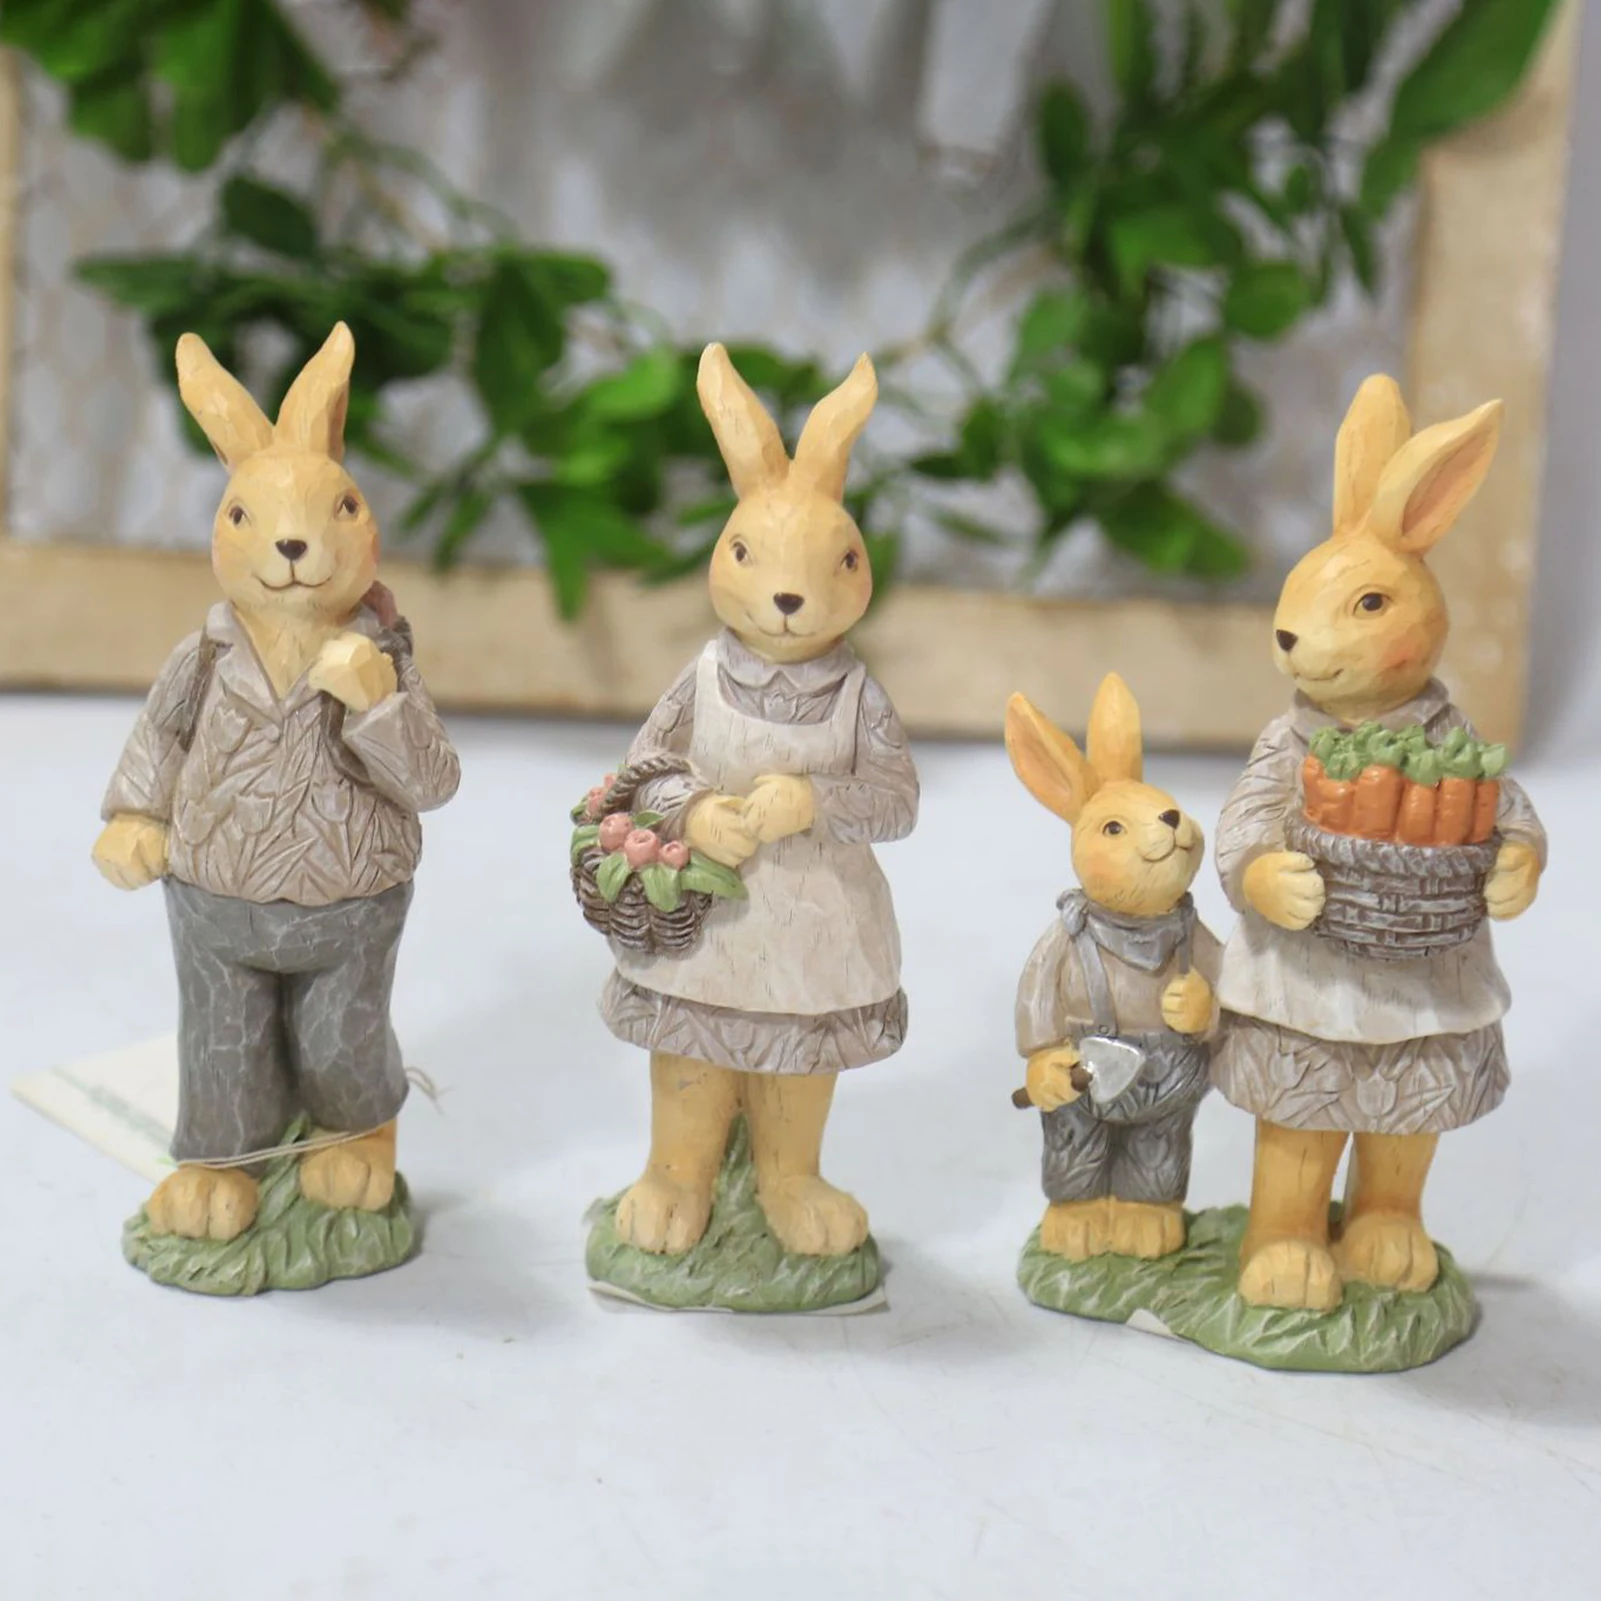 Resin Easter Bunny Ornaments Cute Rabbit Animal Statue With Egg Tulip Carrot Basket Happy Easter Spring Home Table Decoration